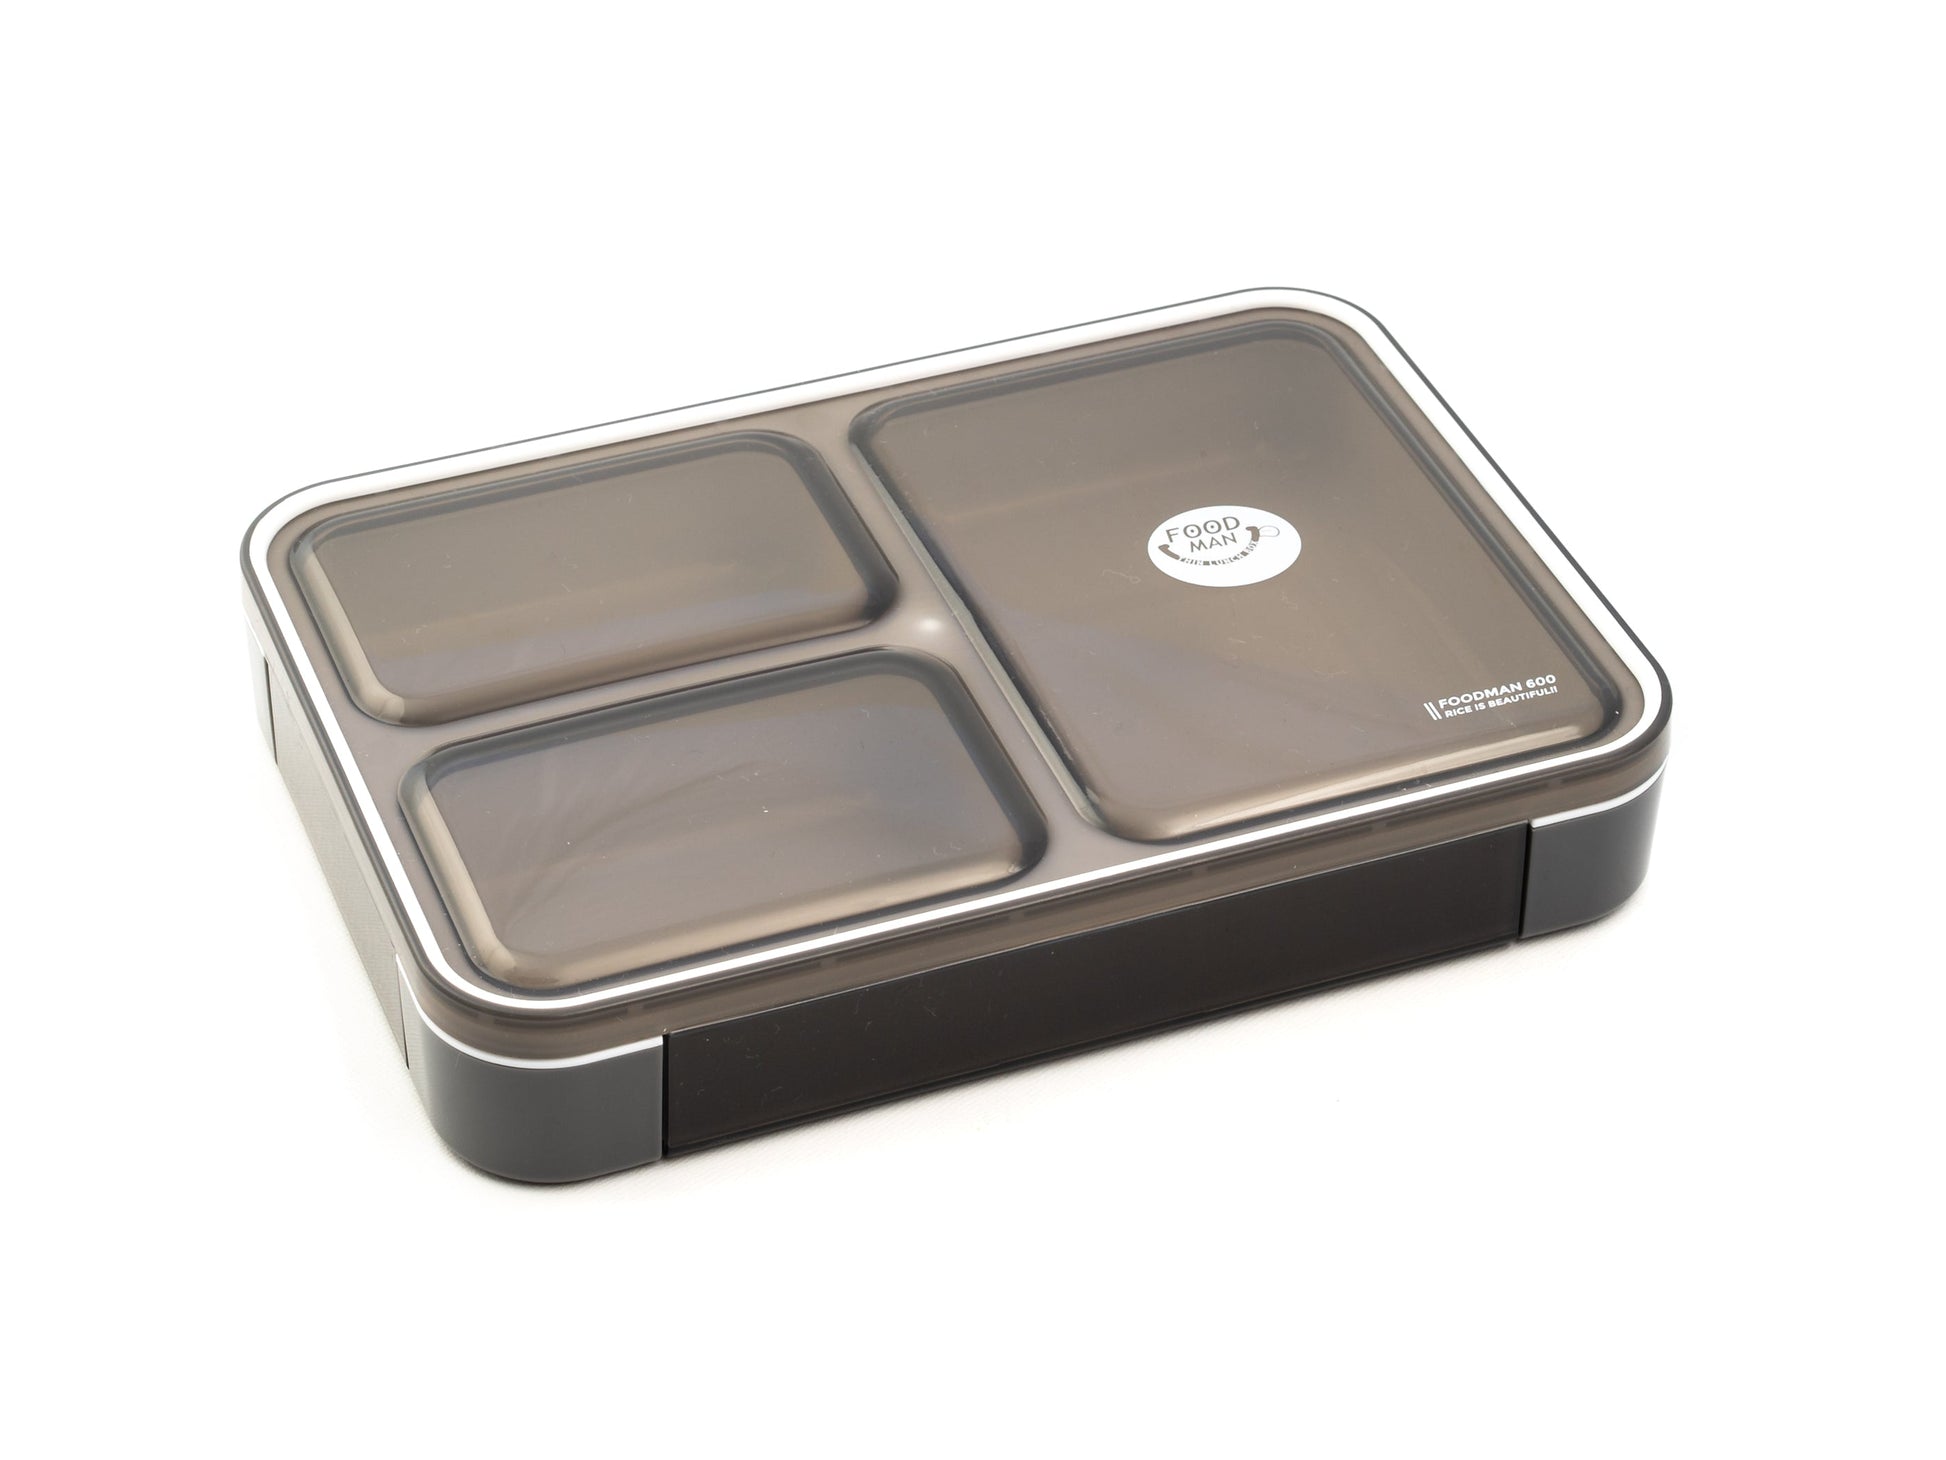 Foodman Bento Box 600 ml | Gray by CB Japan - Bento&co Japanese Bento Lunch Boxes and Kitchenware Specialists